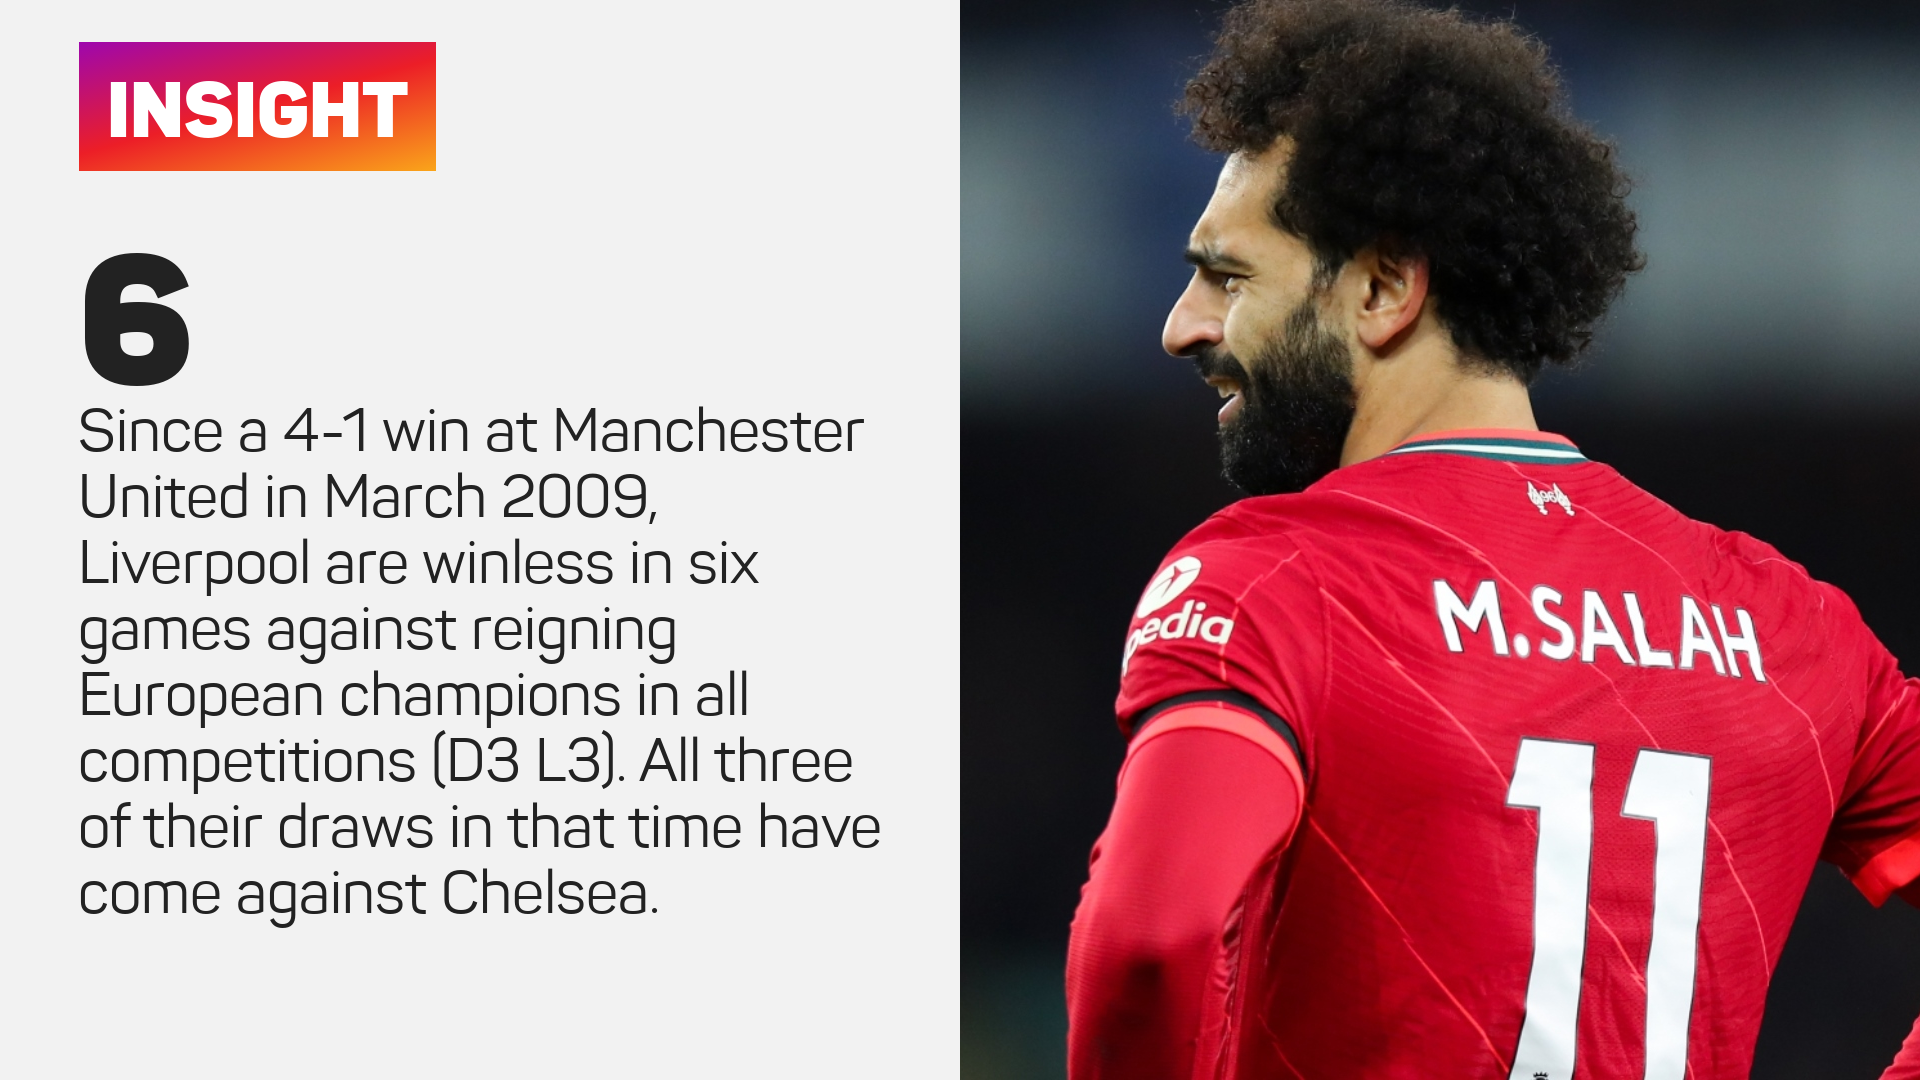 Liverpool record against reigning European champions